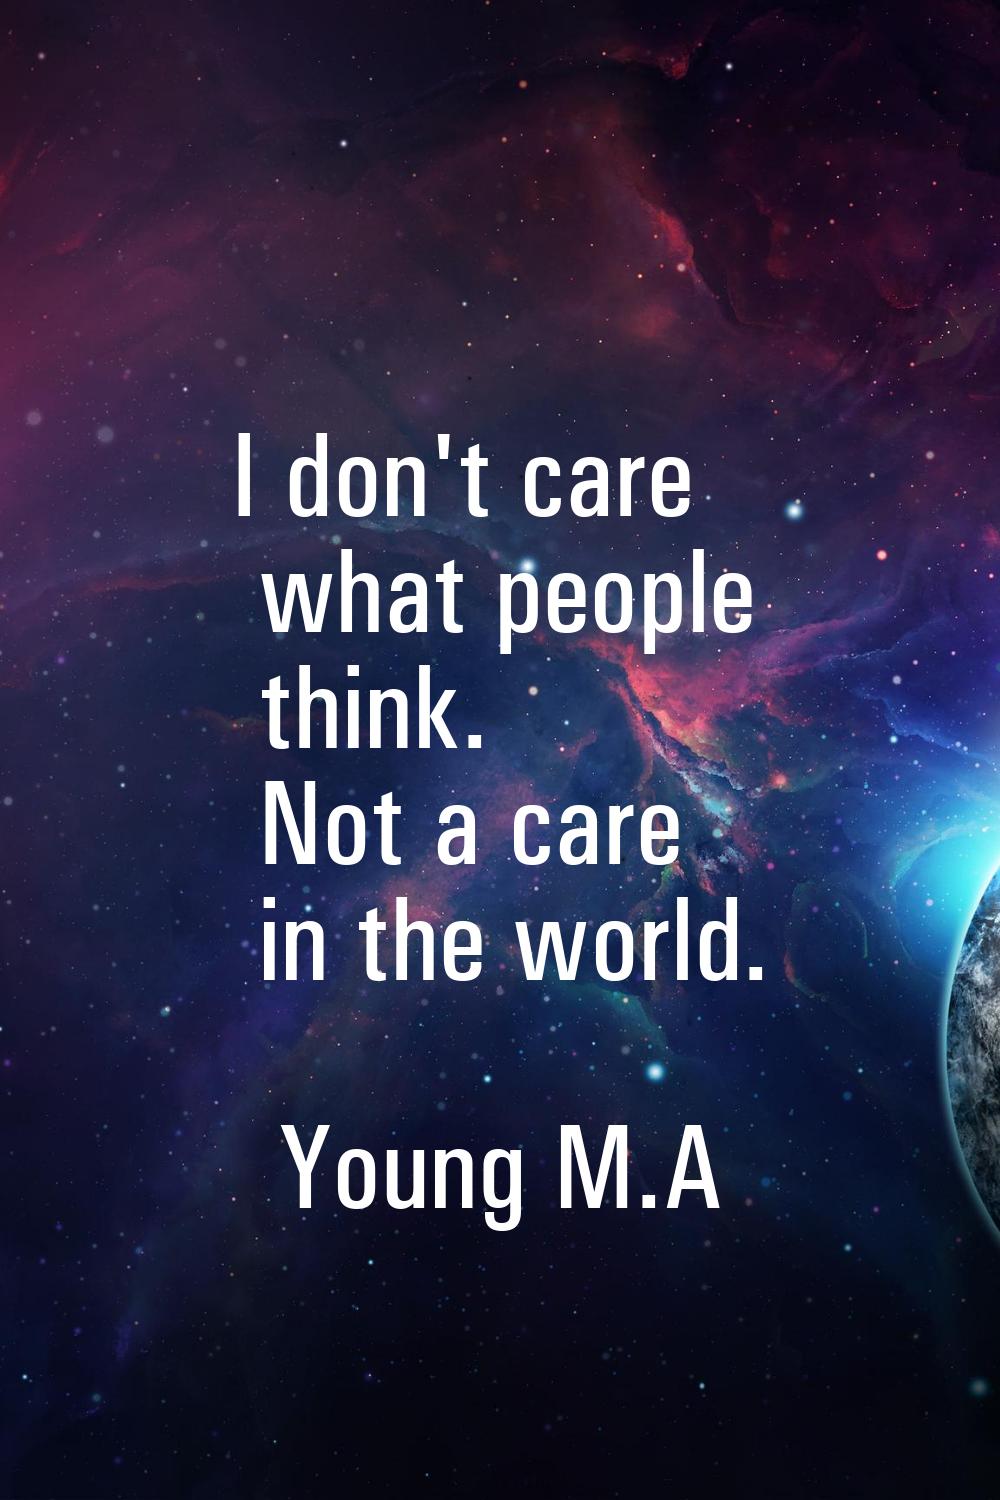 I don't care what people think. Not a care in the world.